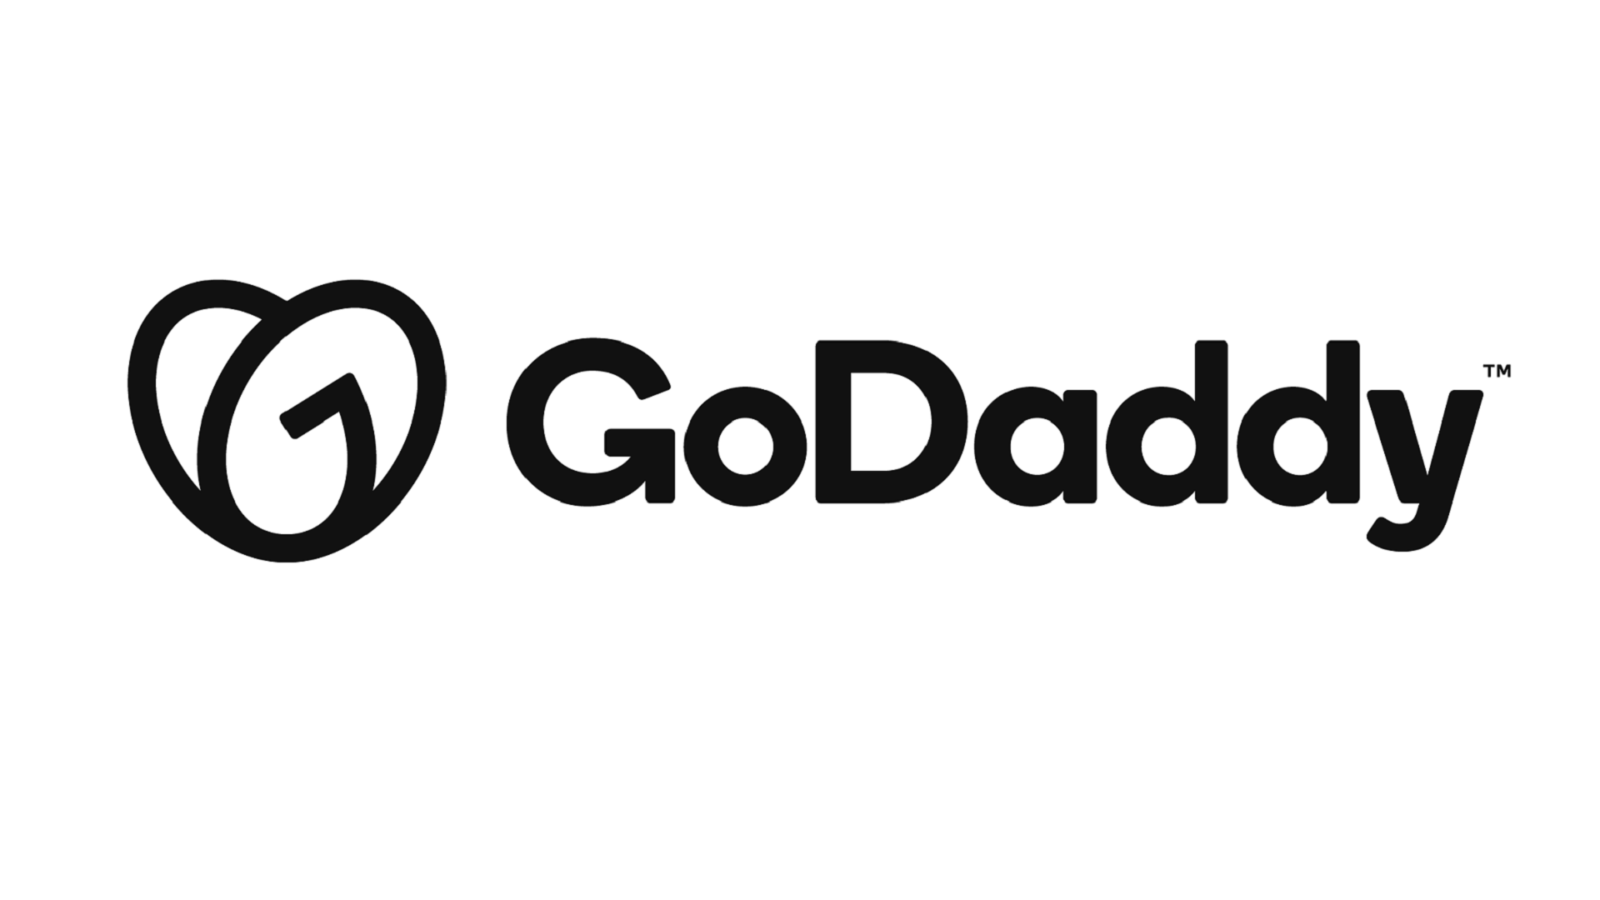 Login Email with Godaddy Webmail - Adclays